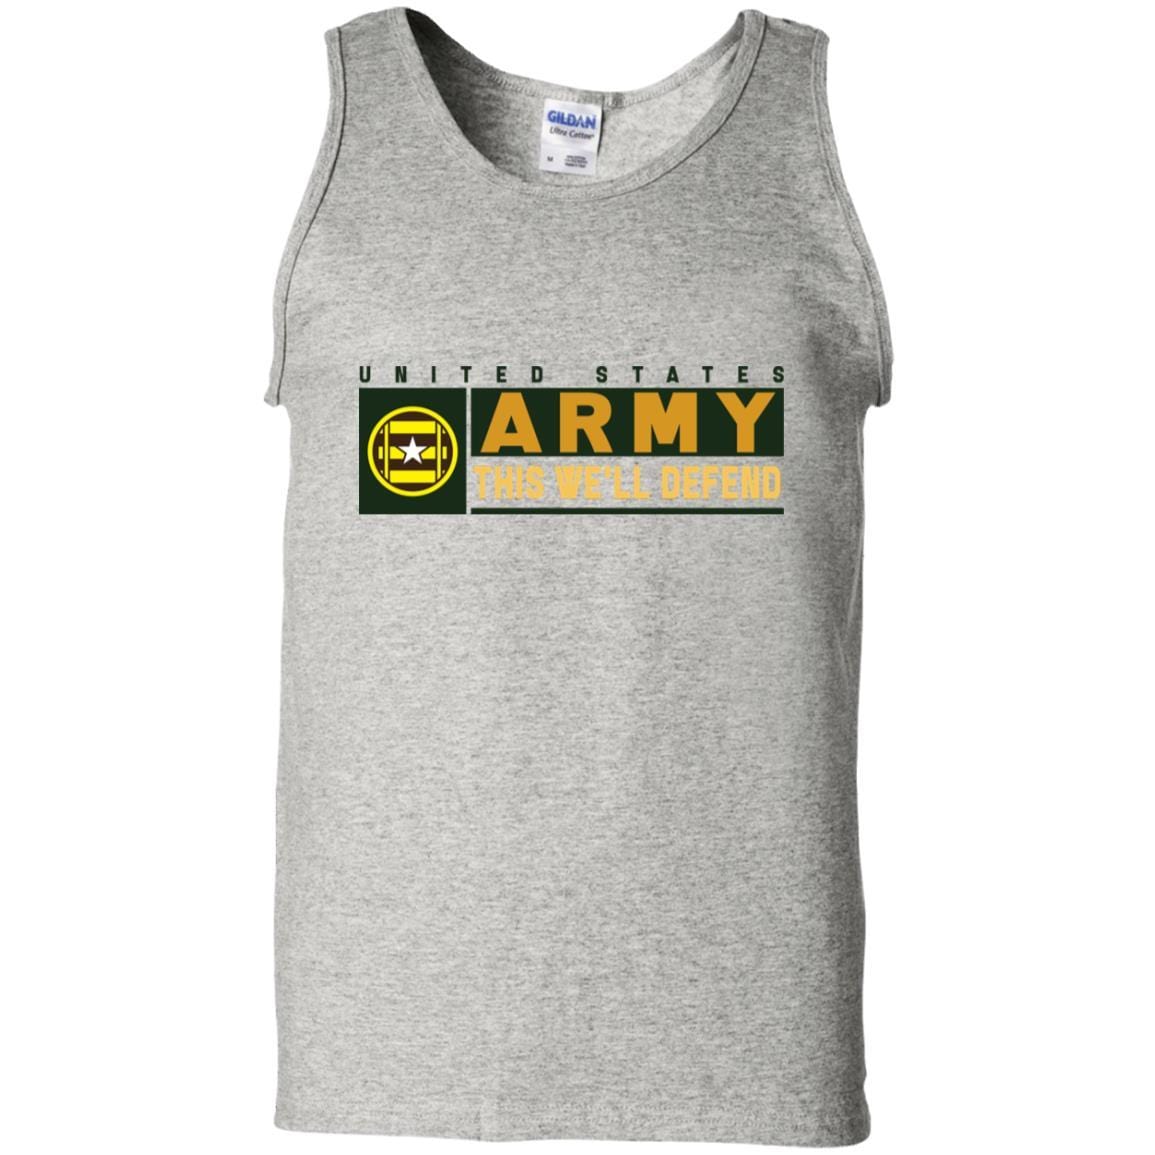 US Army 3RD TRANSPORTATION BRIGADE- This We'll Defend T-Shirt On Front For Men-TShirt-Army-Veterans Nation